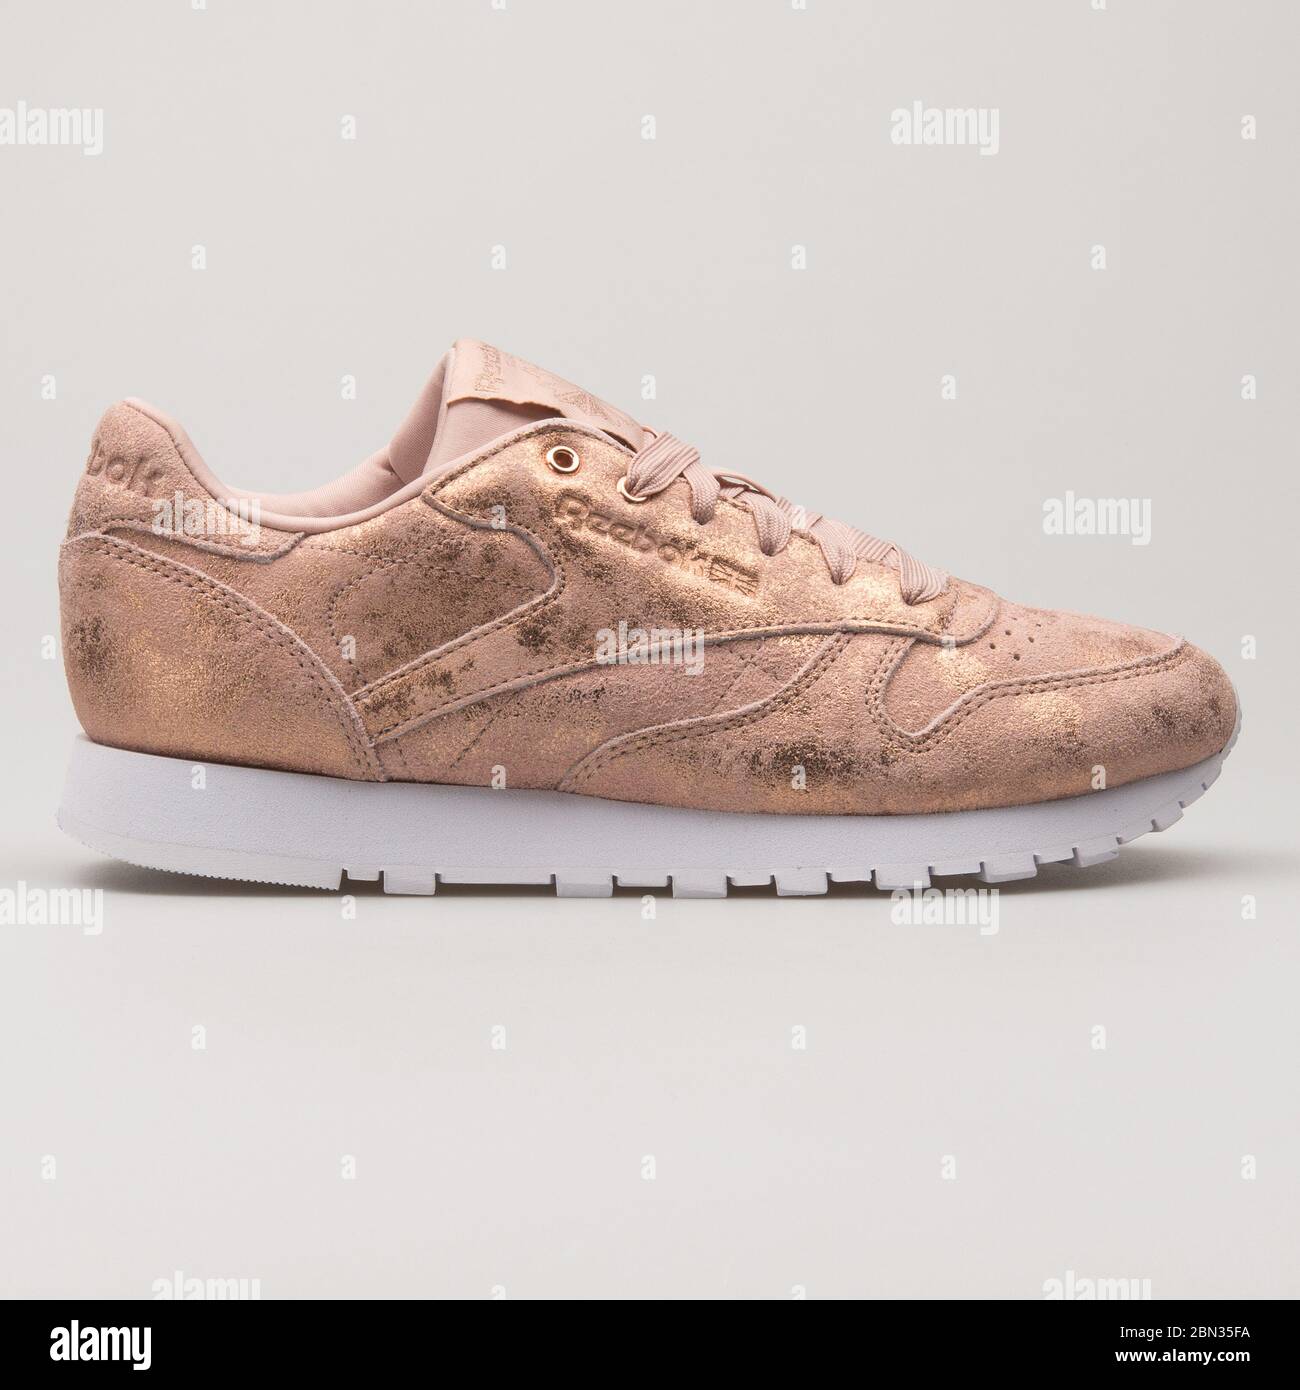 Reebok Classic High Resolution Stock Photography and Images - Alamy